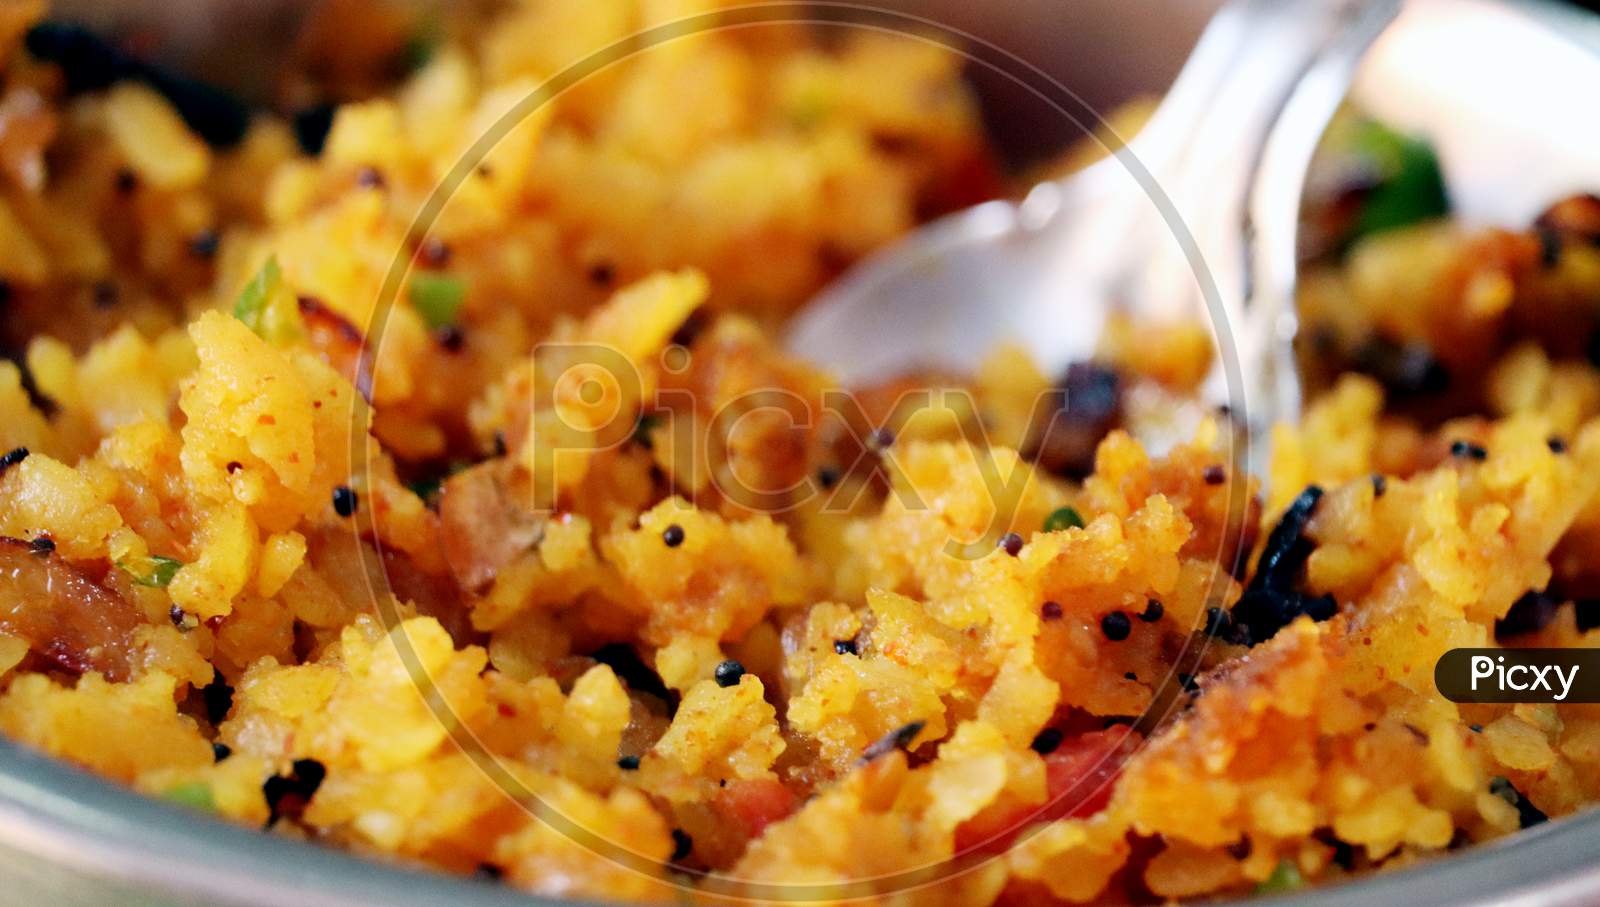 Indian Breakfast Tasty Food Poha Paddy Food In A Plate